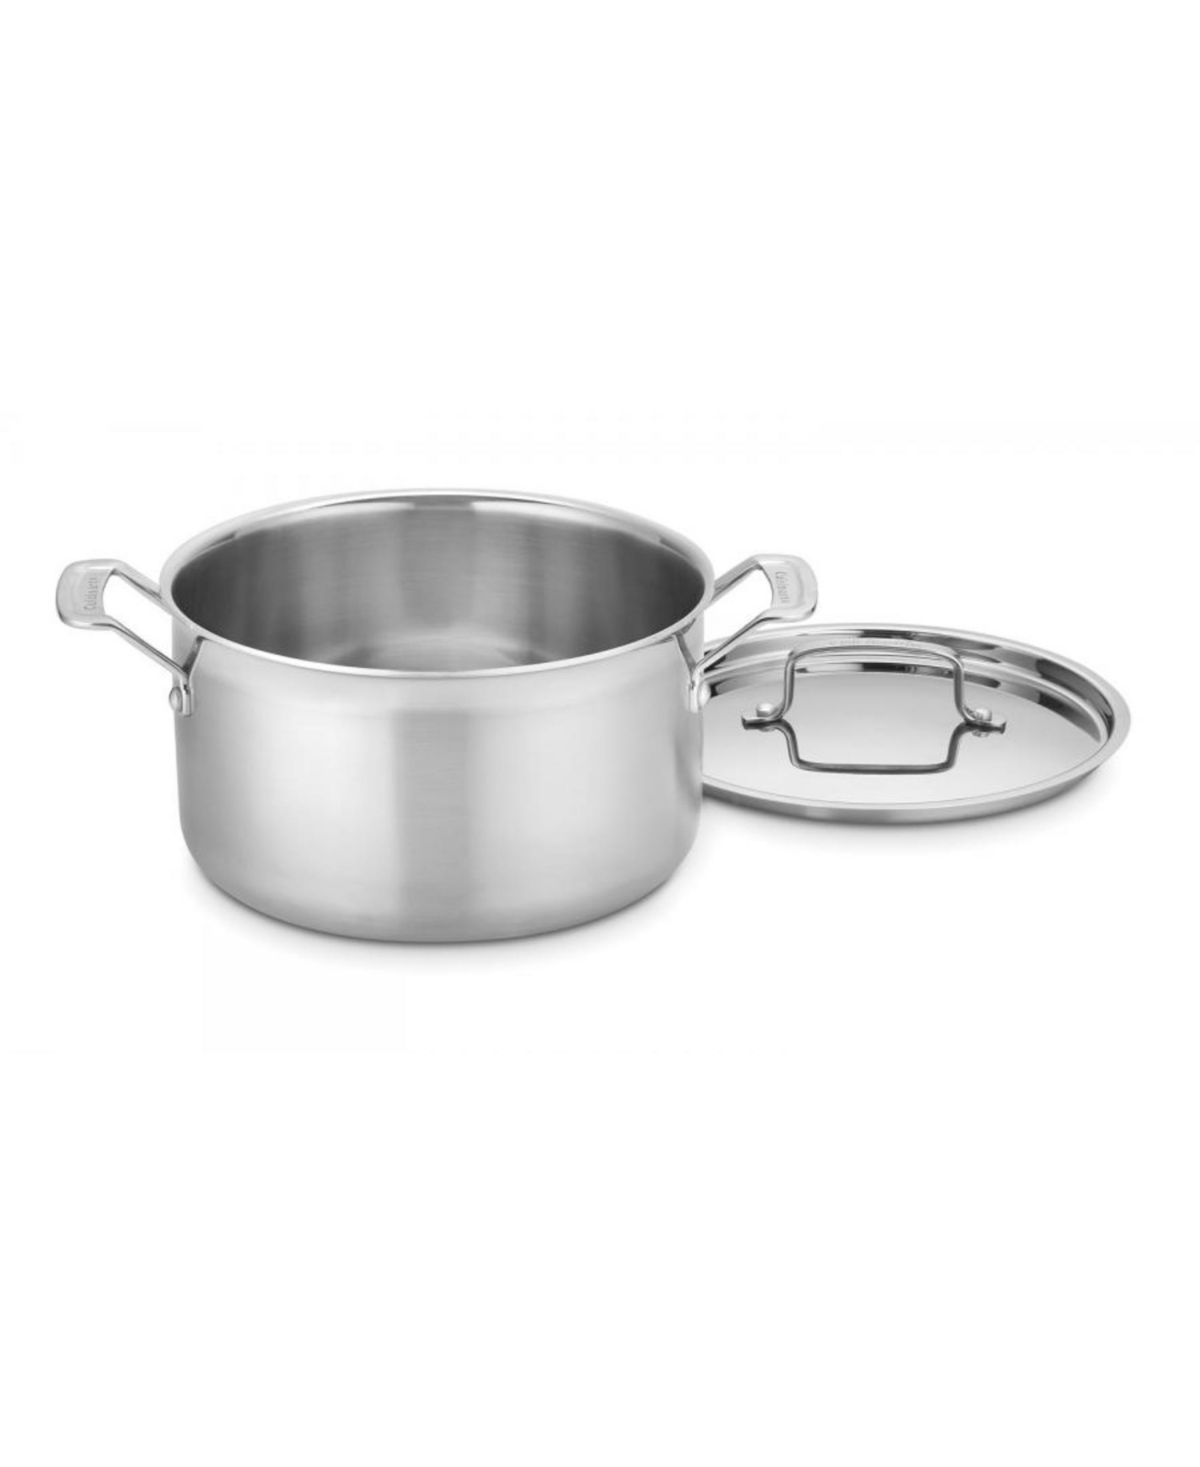 Cuisinart Multiclad Pro 6-qt. Sauce-pot With Cover In Metallic